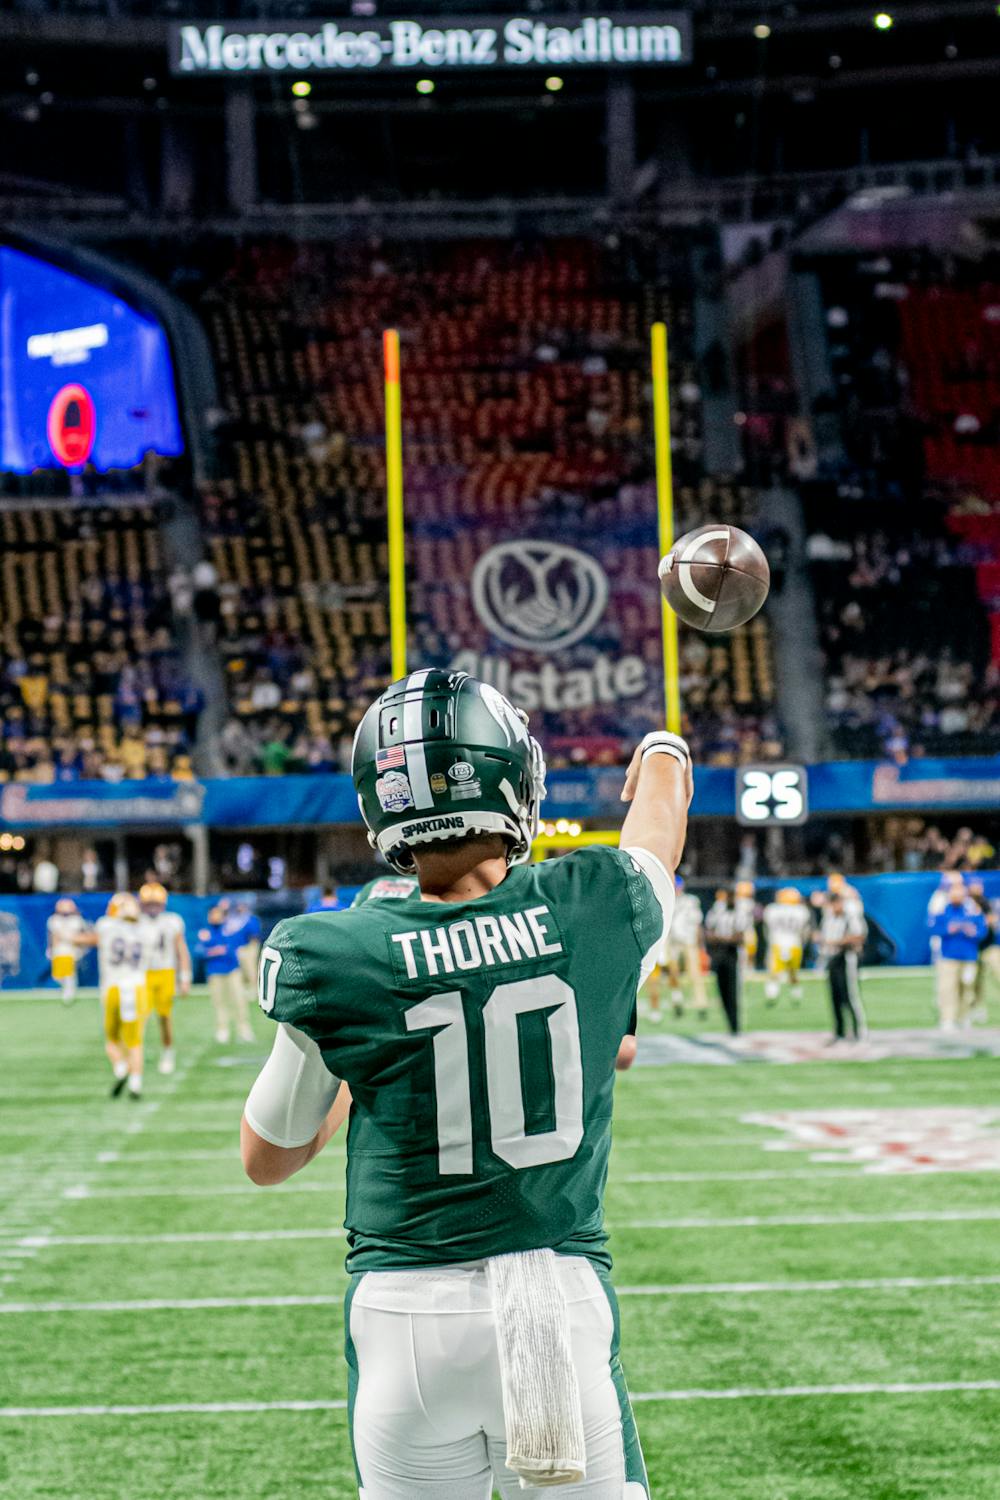 <p>Redshirt sophomore Payton Thorne throws passes before the Spartans 31-21 victory against Pitt in the Chick-Fil-A Peach Bowl on Dec. 30, 2021.</p>